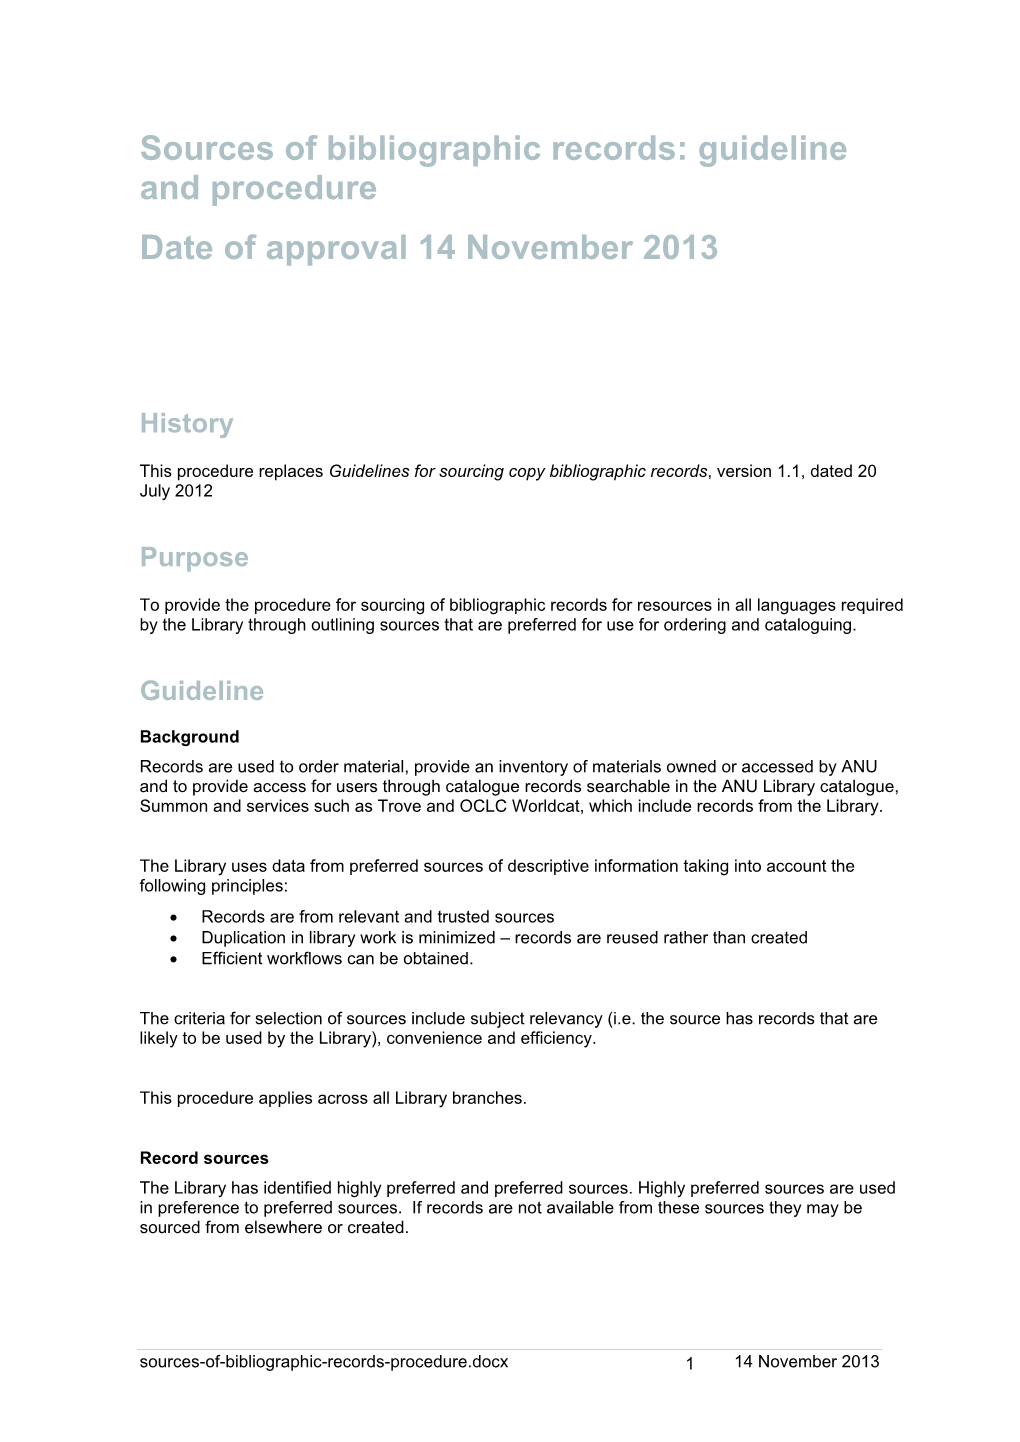 Sources of Bibliographic Records: Guideline and Procedure Date of Approval 14 November 2013